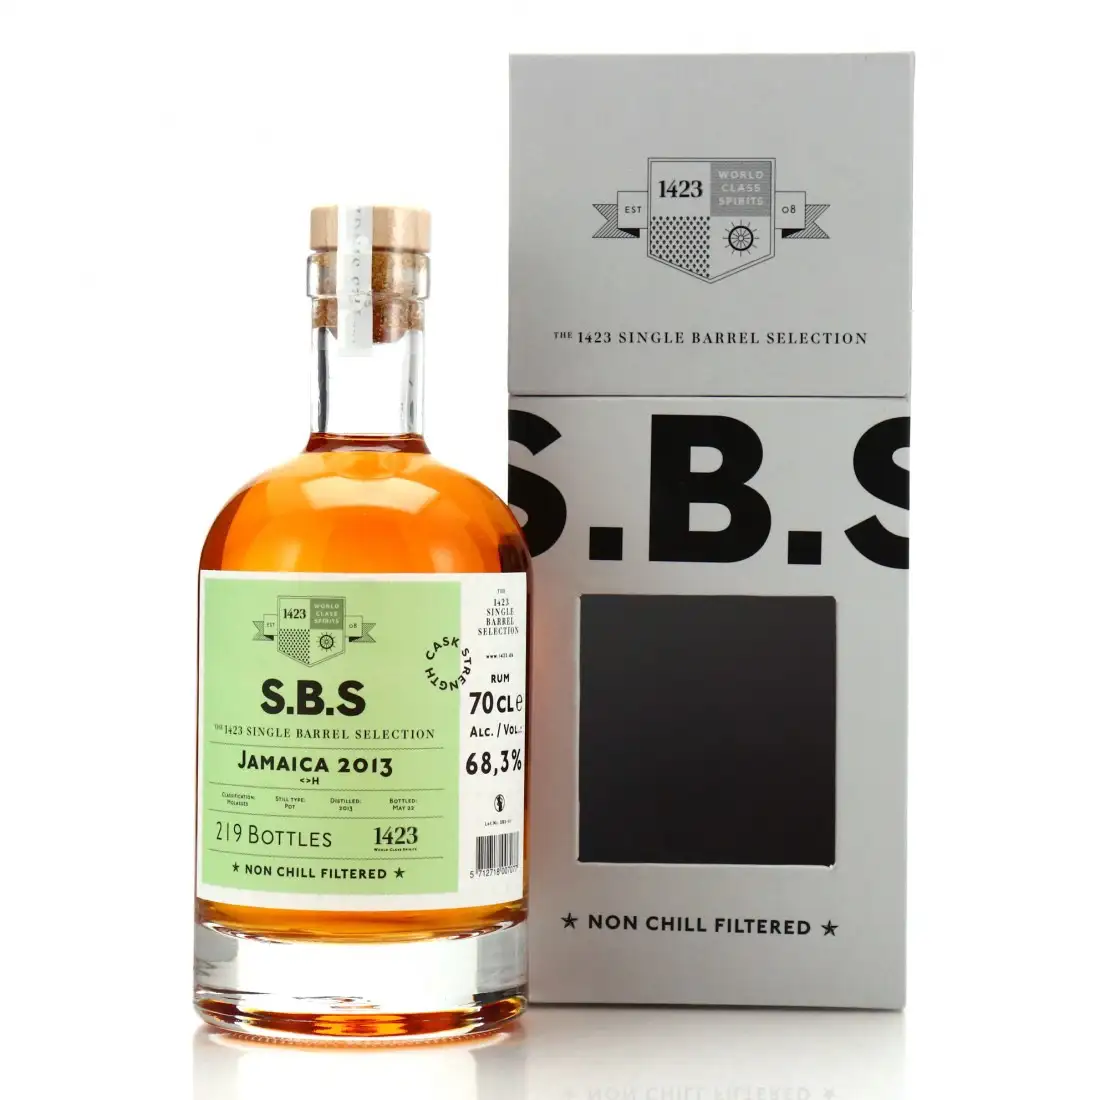 Image of the front of the bottle of the rum S.B.S Jamaica <>H